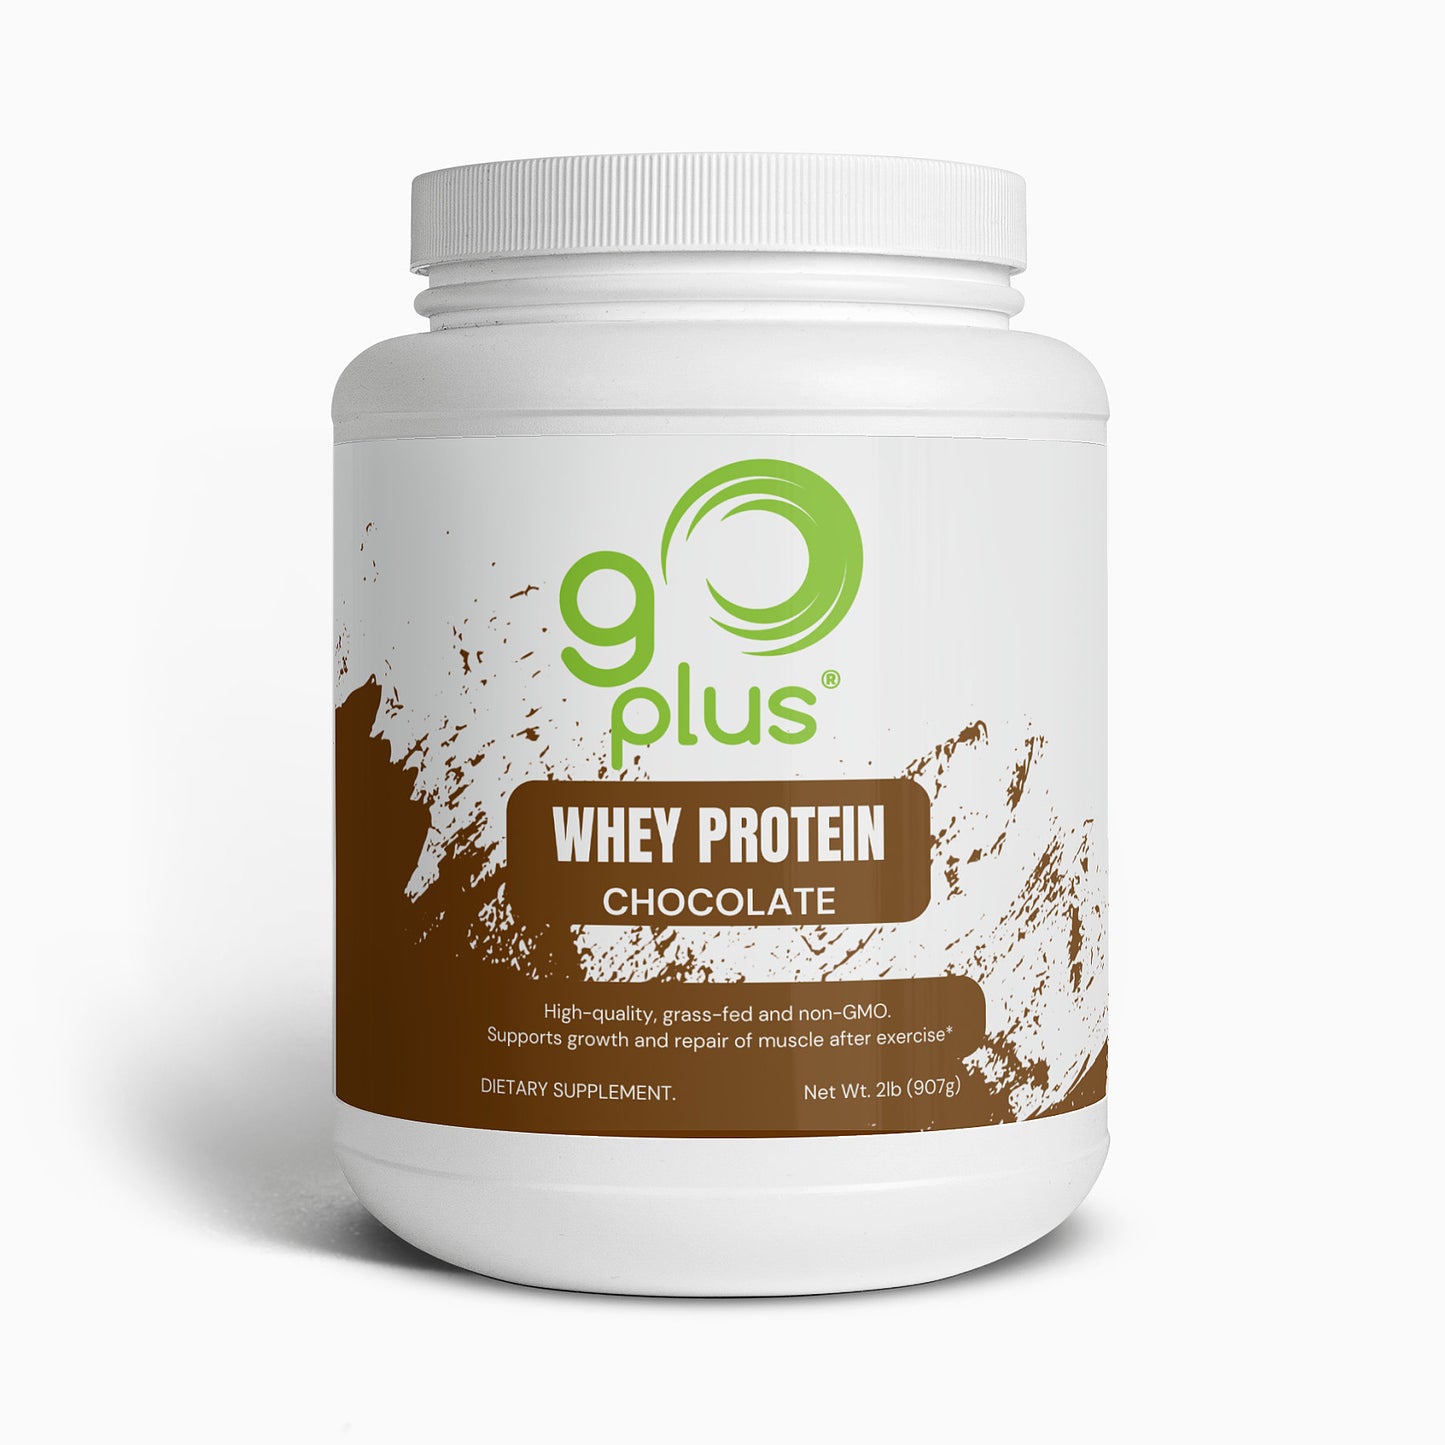 Whey Protein (Chocolate Flavour) 2 lb Go Plus Vitamins & Supplements